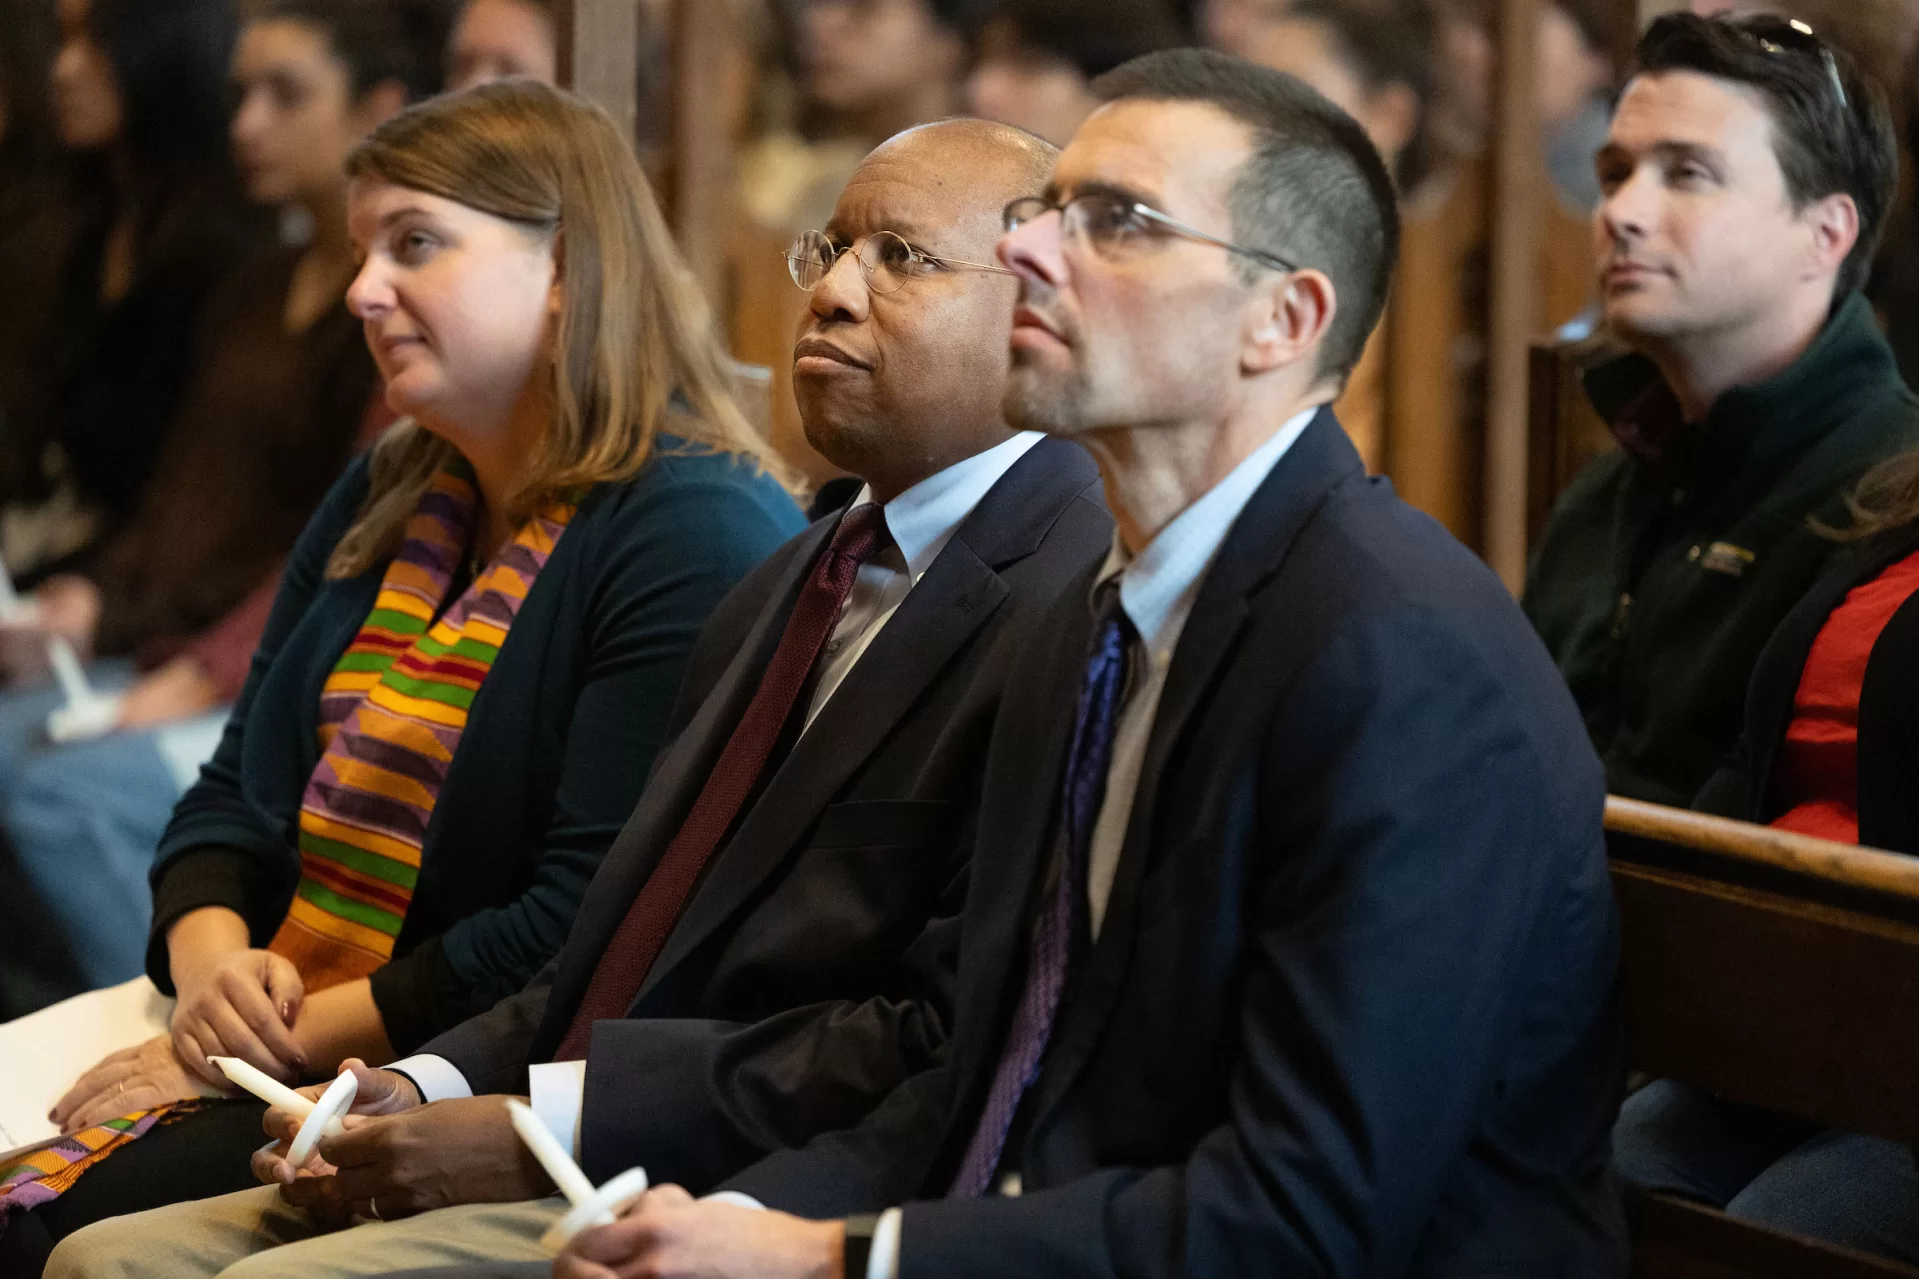 “The brightness that shines through the dark of a tragedy such as we have suffered here in Lewiston, our home, is what it always is in times like these: the immense capacity of our shared humanity,” said Bates President Garry W. Jenkins in his remarks during today’s Vigil for Grief and Remembrance, held at 4:30 p.m. in Gomes Chapel on the one-week anniversary of the shootings in Lewiston. Led by the Rev. Brittany Longsdorf, the college’s multifaith chaplain, the vigil gave the campus community an opportunity to come together for silence, candle lighting, poetry, and interfaith prayers, and, ultimately, to share communal grief with their Lewiston community. Welcome & Naming Grief: Brittany Longsdorf, Multifaith Chaplain and Visiting Lecturer in the Humanities Bates President Garry W. Jenkins Remarks Lewiston Mayor Carl Sheline’s Remarks Invitation for Sharing: Brittany Longsdorf *Barry Music* (single floor mic, guitar output) Reading of the Names: Brittany Longsdorf and Raymond Clothier, associate multifaith chaplain • Tricia C. Asselin • Peyton Brewer-Ross • William Frank Brackett • Thomas Ryan Conrad • Michael R. Deslauriers II • Maxx A. Hathaway • Bryan M. MacFarlane • Keith D. Macneir • Ronald G. Morin • Joshua A. Seal • Arthur Fred Strout • Stephen M. Vozzella • Lucille M. Violette • Robert E. Violette • Joseph Lawrence Walker • Jason Adam Walker • William A. Young • Aaron Young *moment of silence* & closing, begin to pass candle lighting READINGS (all from Lectern mic unless noted) Aneeza Ahmad ‘25 of Sharon, Mass., and Alaina Rauf ‘25 of Yarmouth, Me., of the Bates Muslim Student Association Sophie Leight ‘26 of Easton, Md. Venerable Tenzin Dasel, ‘88 - volunteer spiritual advisor and founder of the Maine Mindfulness Project and is an active retreat leader and speaker in the International Network of Engaged Buddhists Levi Mindlin ‘24 of Portland, Ore - song (single floor mic, guitar output)